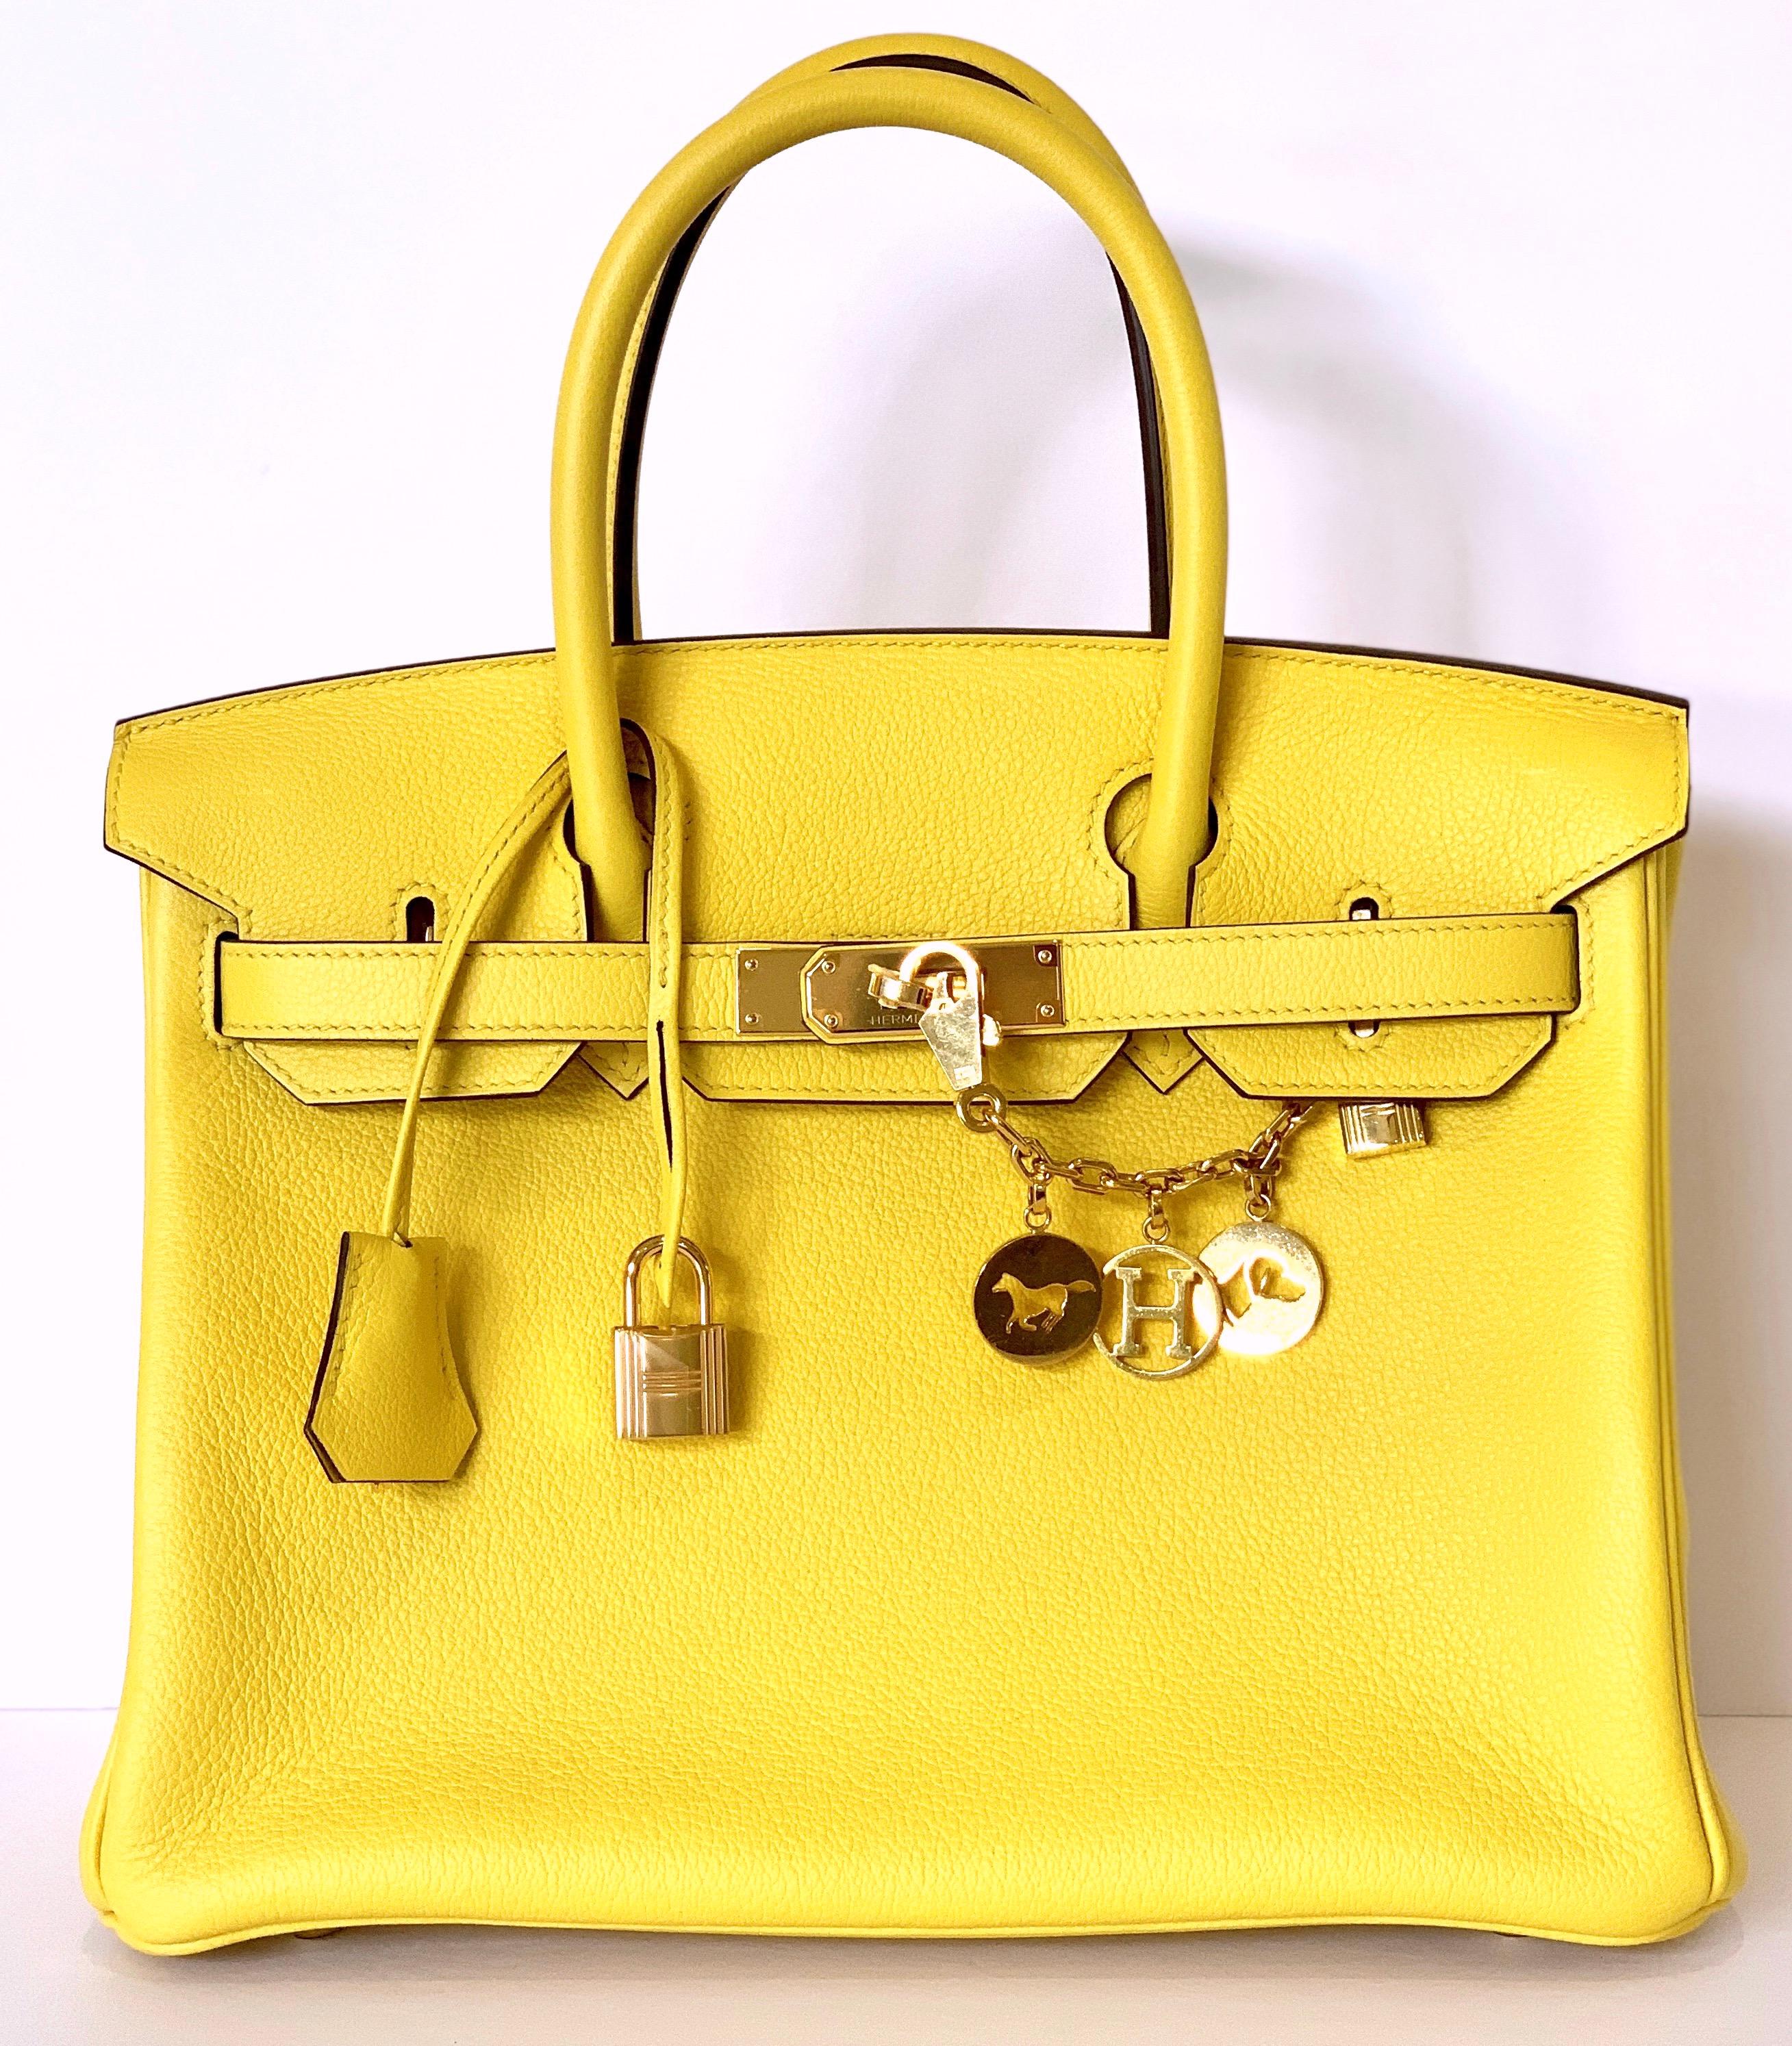 Hermès Jaune de Naples Birkin 30cm of taurillon novillo leather with gold hardware.

 

This Birkin has tonal stitching, a front toggle closure, a clochette with lock and two keys, and double rolled handles.

 

The interior is lined with Jaune de